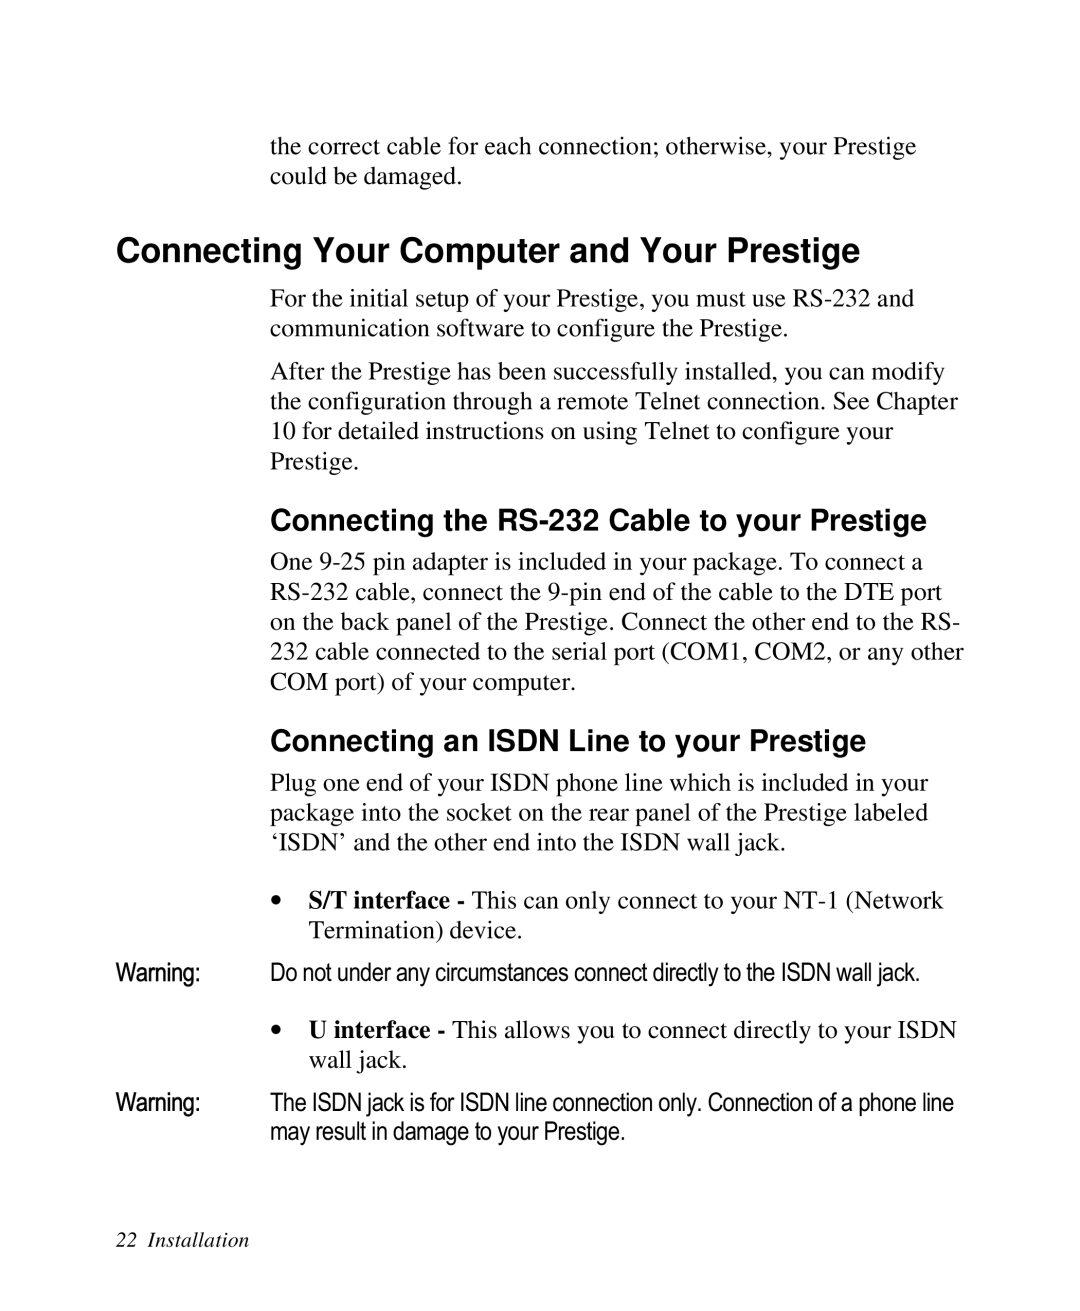 ZyXEL Communications Prestige100 Connecting Your Computer and Your Prestige, Connecting the RS-232 Cable to your Prestige 